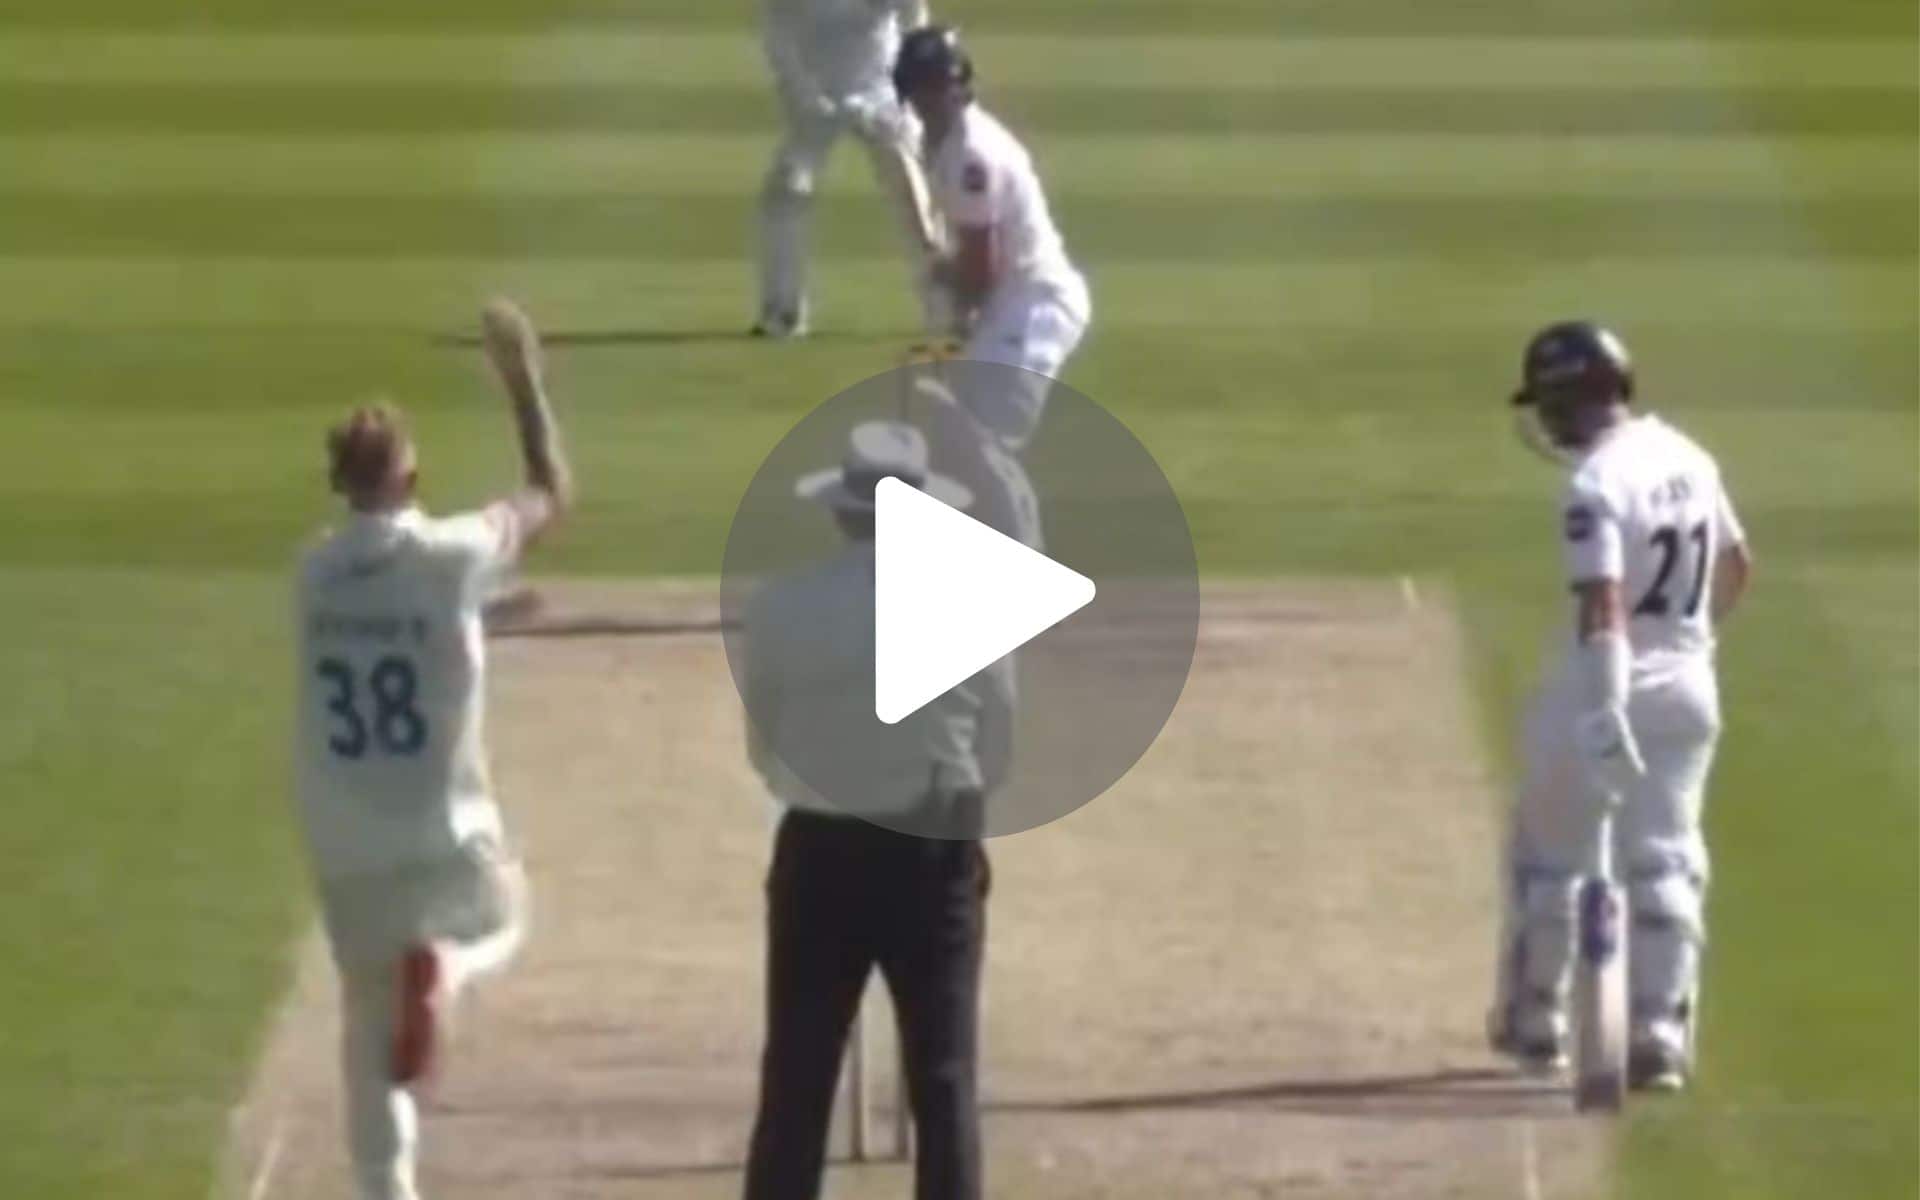 [Watch] Stokes Sizzles With A Five-Wicket Haul In County Championship Return For Durham